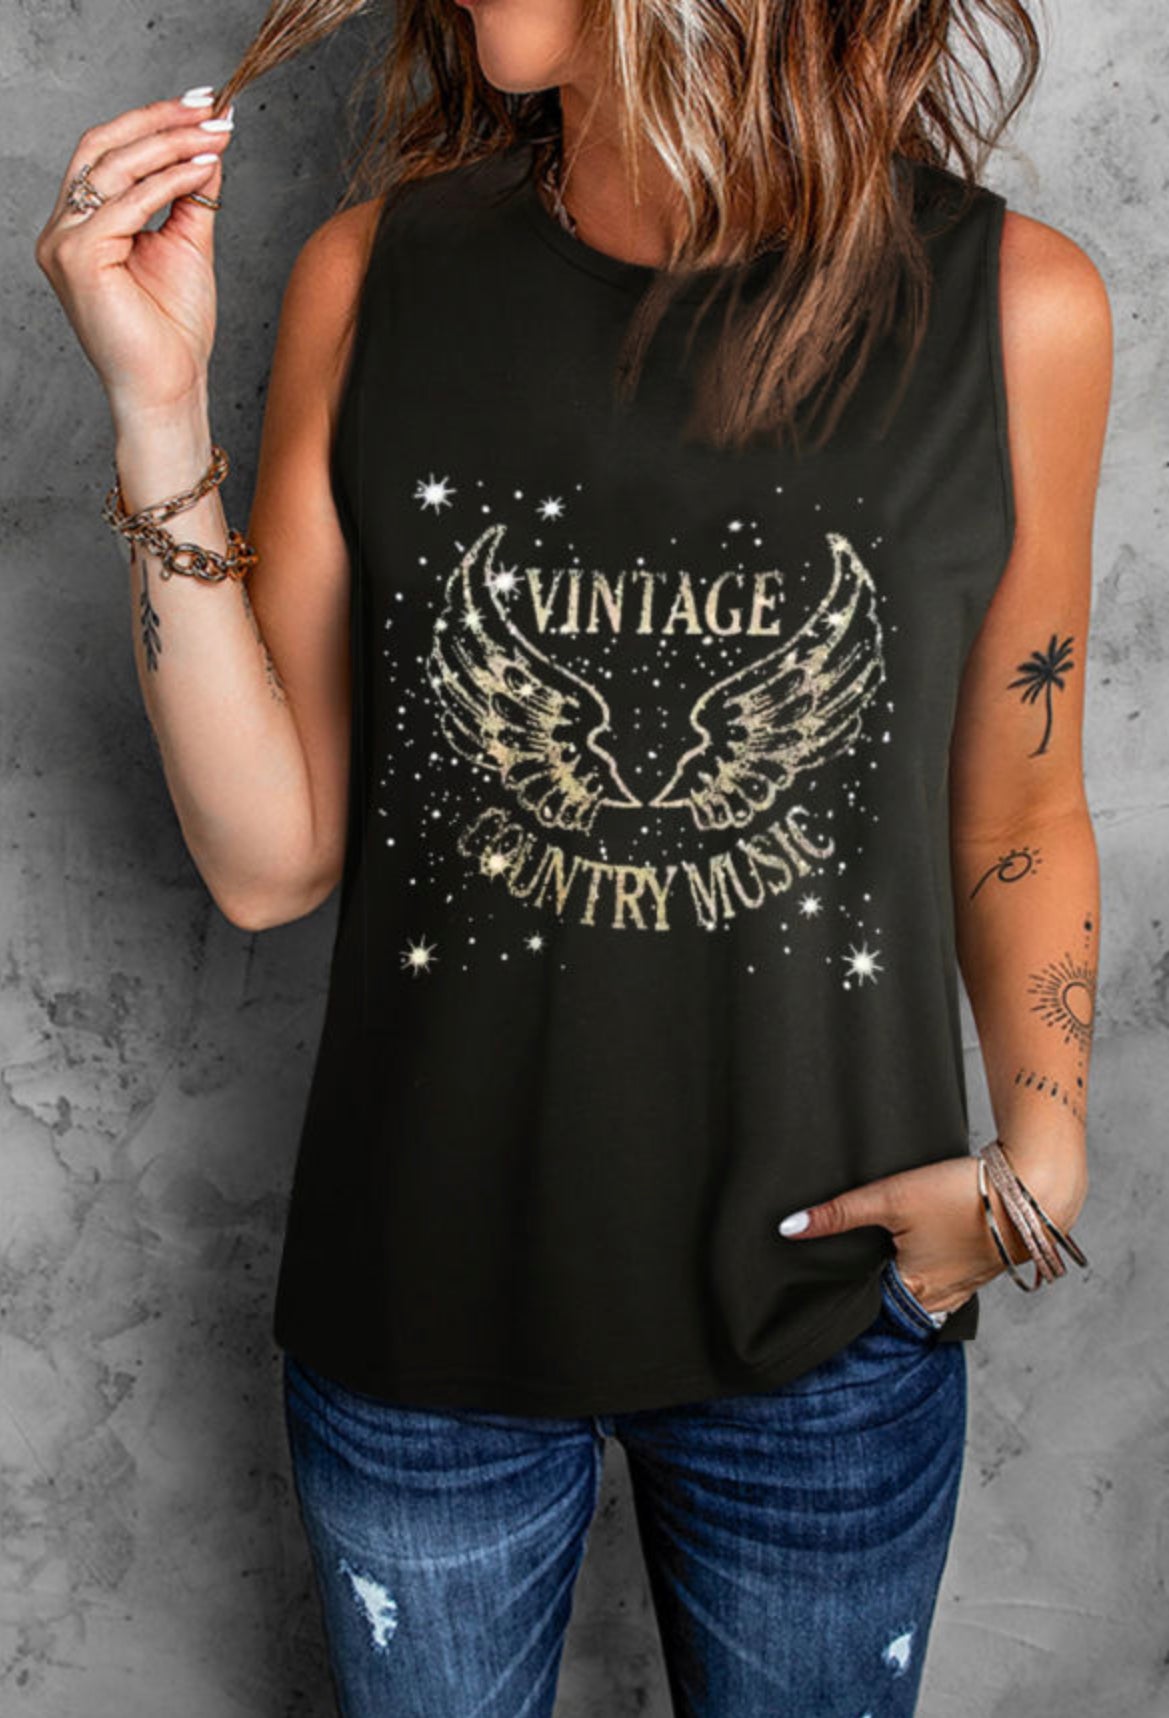 Black Vintage Country Music Glitter Tank Top